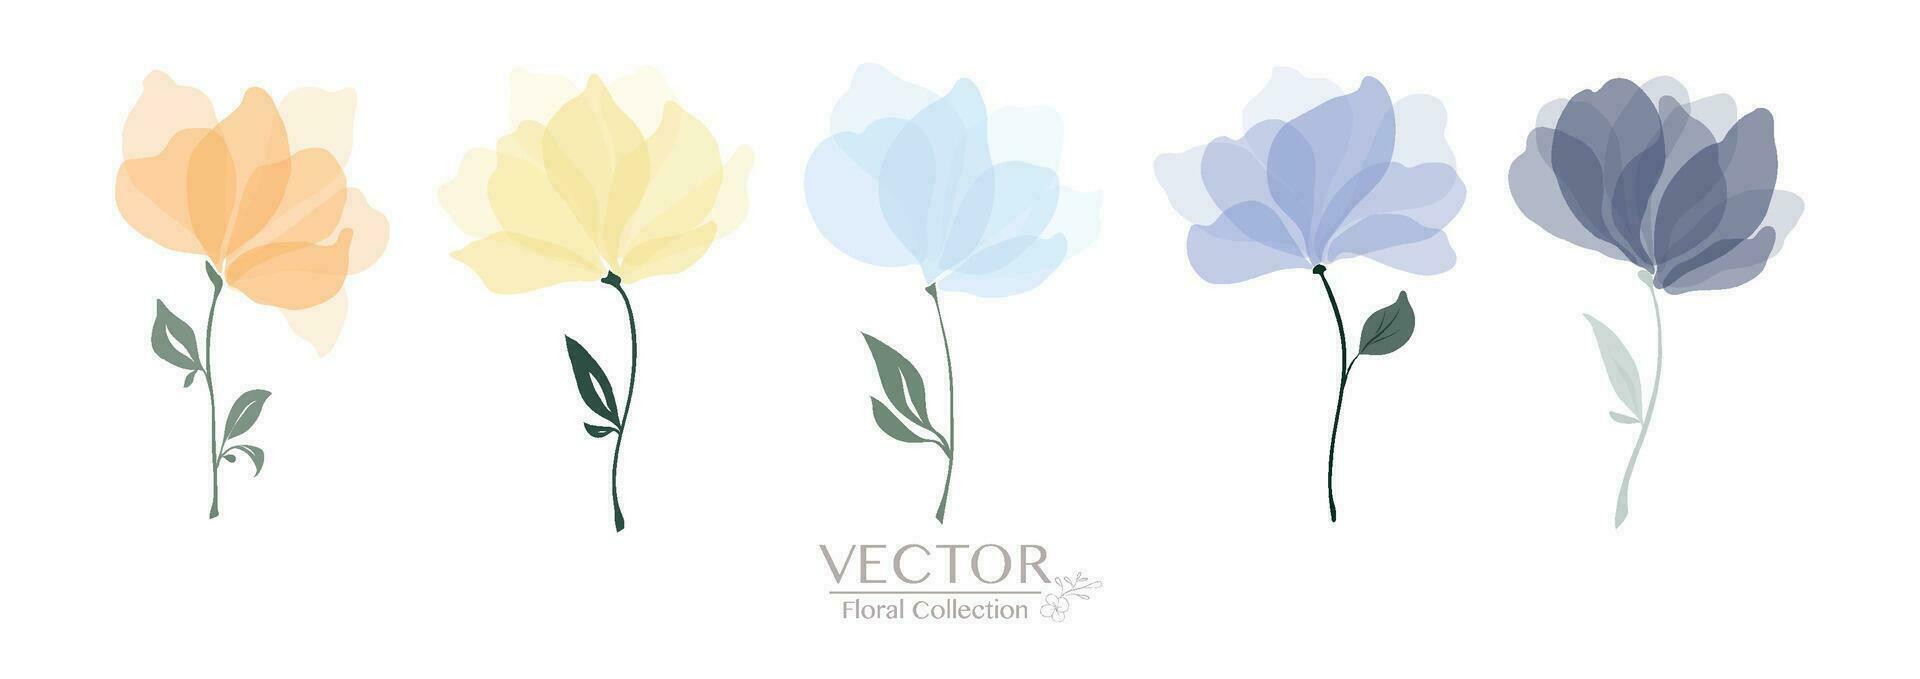 Set of colorful floral collection vector